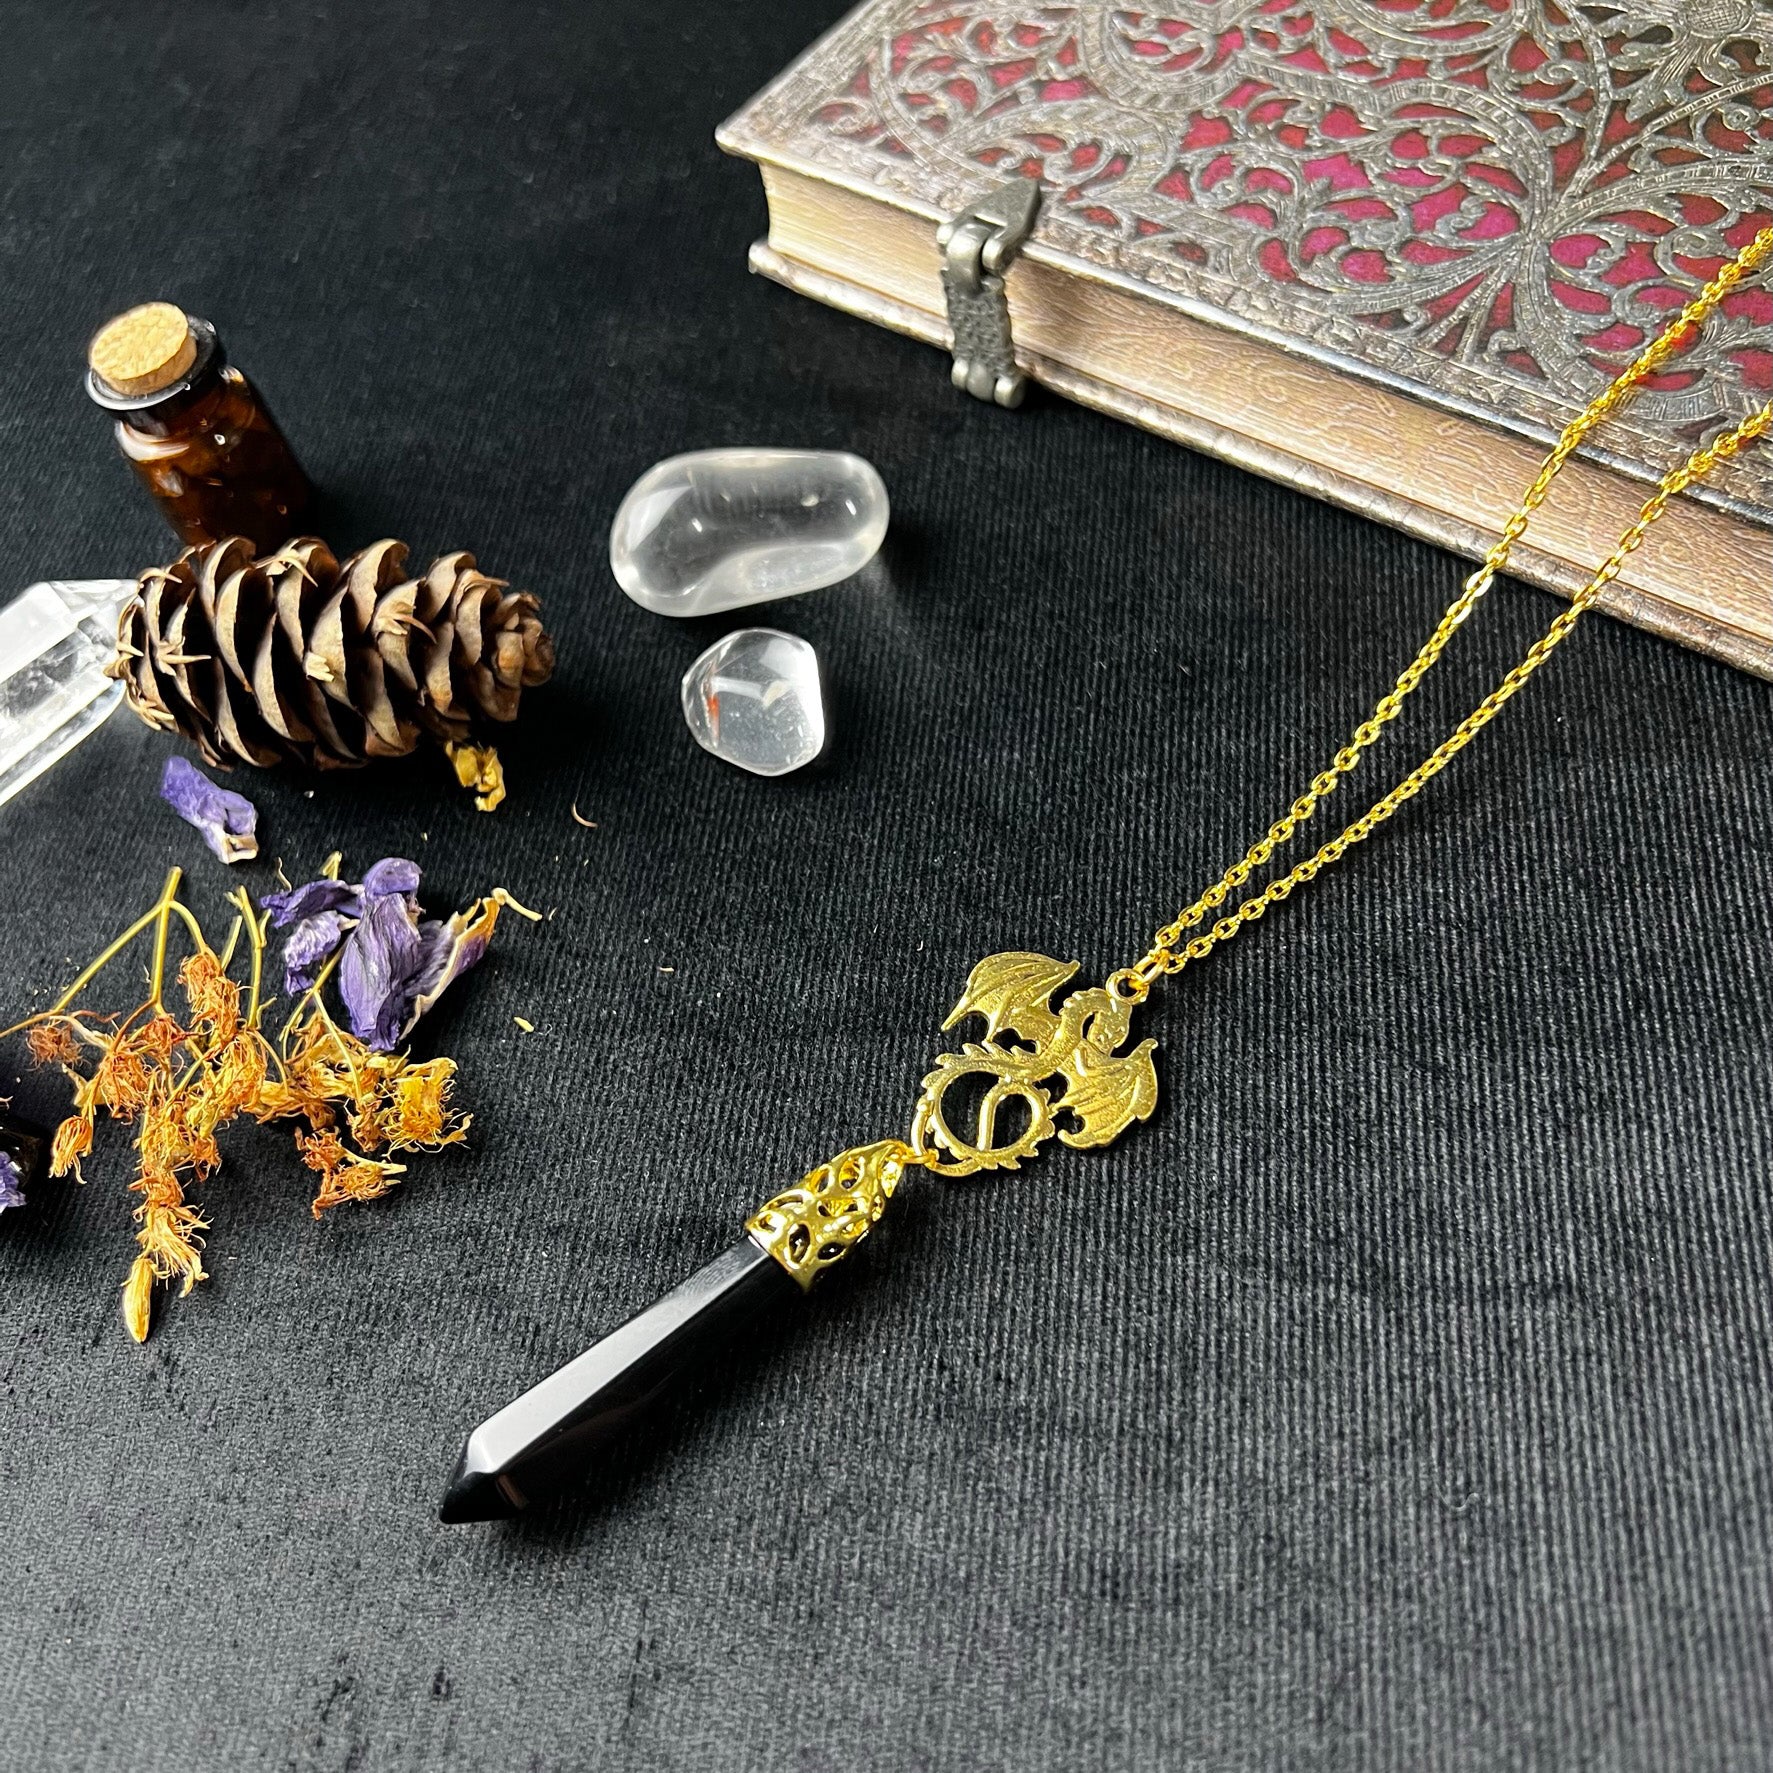 Golden onyx and dragon divination pendulum necklace - The French Witch shop